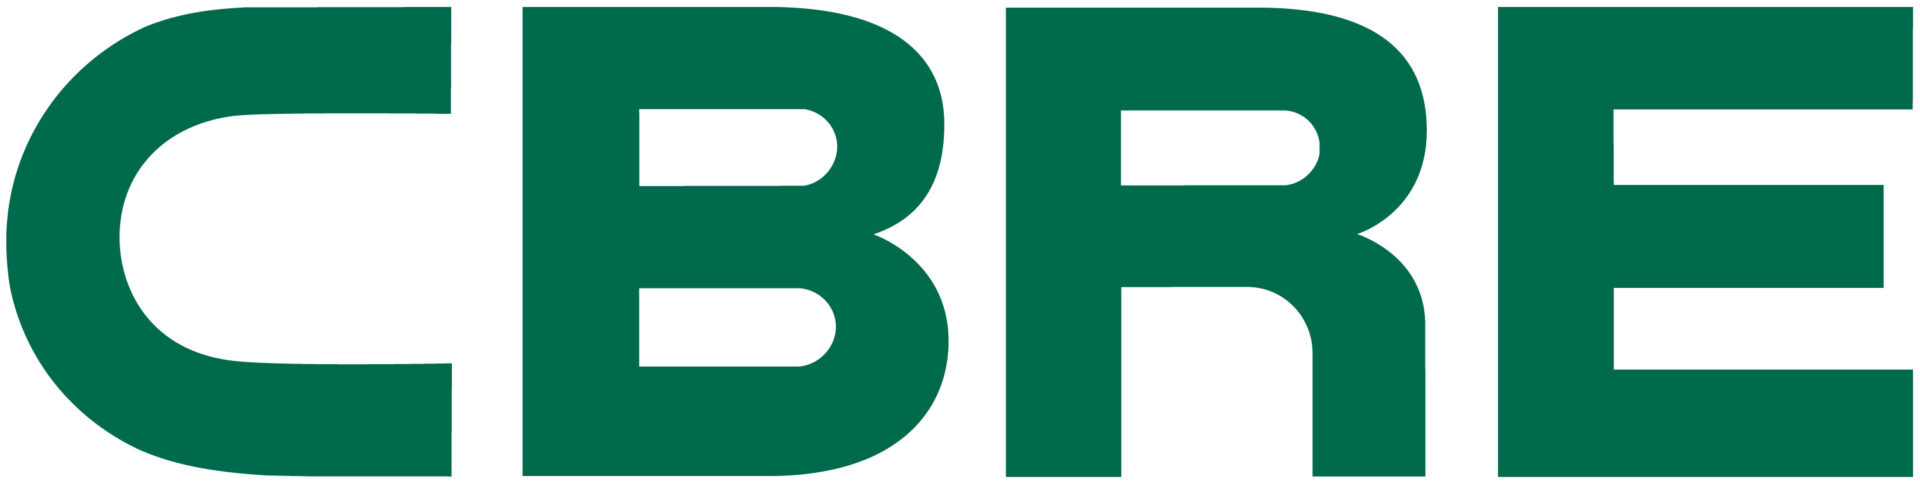 Green logo of cbre with bold, uppercase letters.